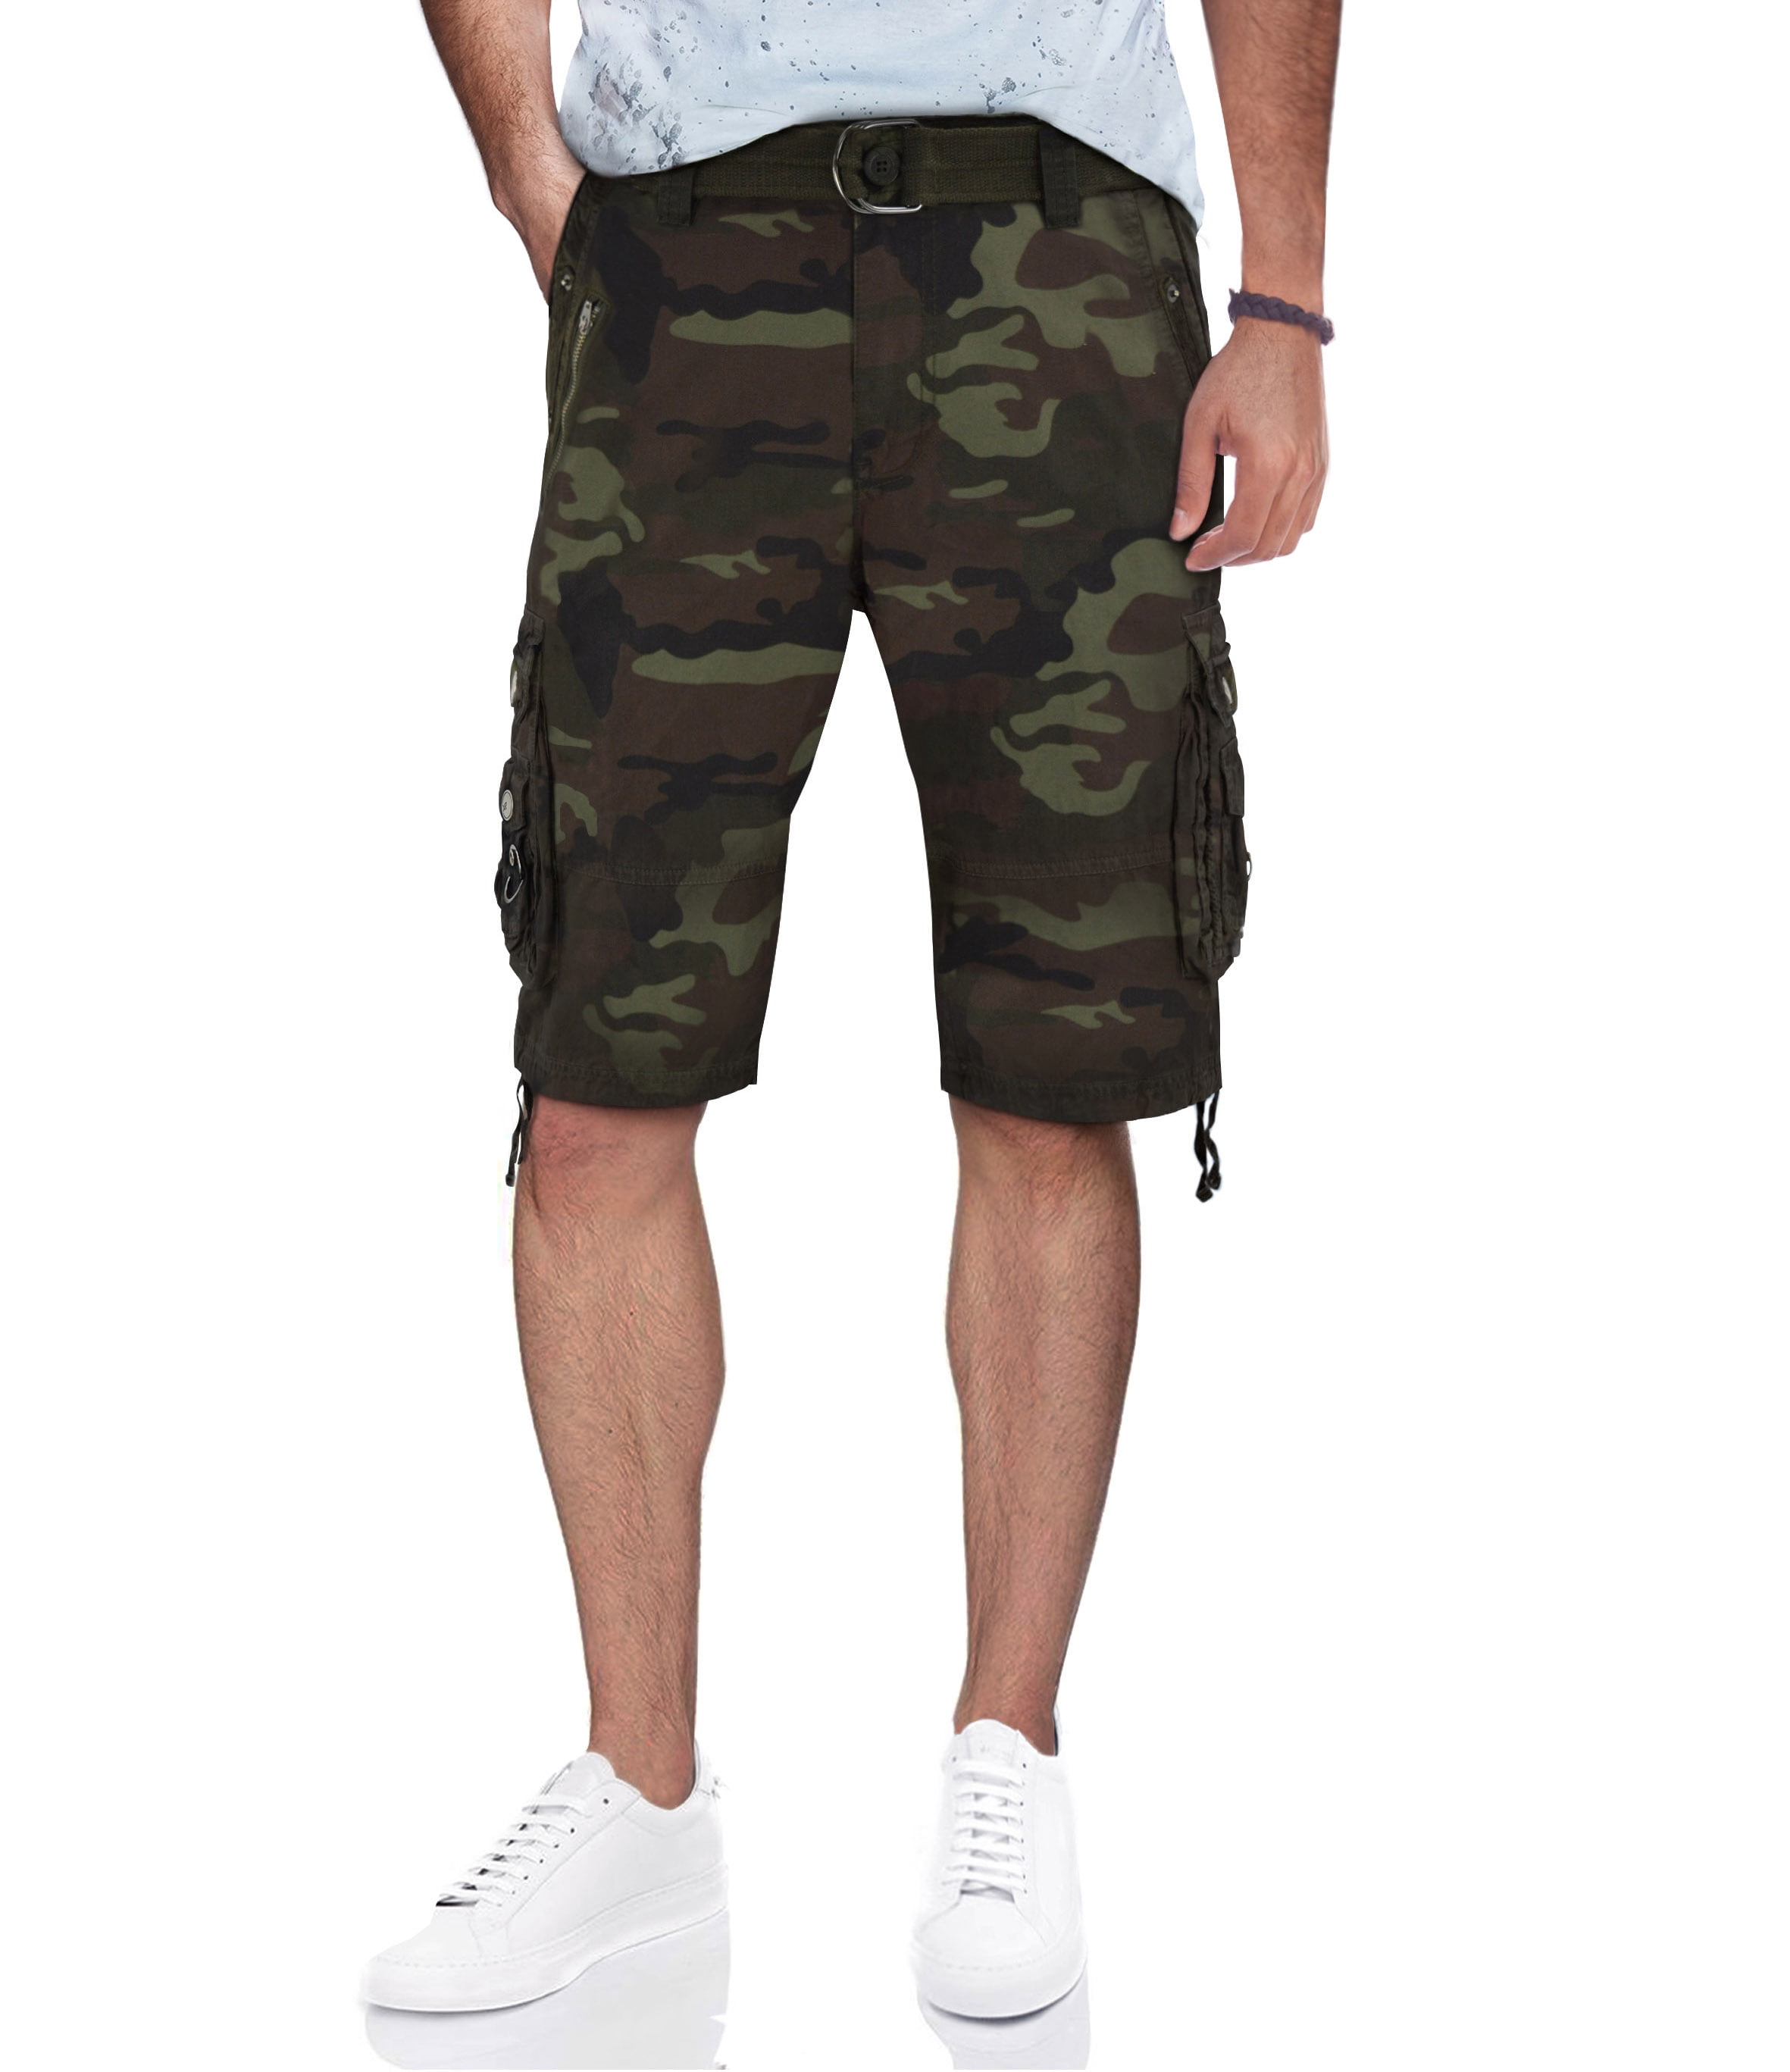 XRAY Men's Belted Tactical Cargo Shorts 12.5